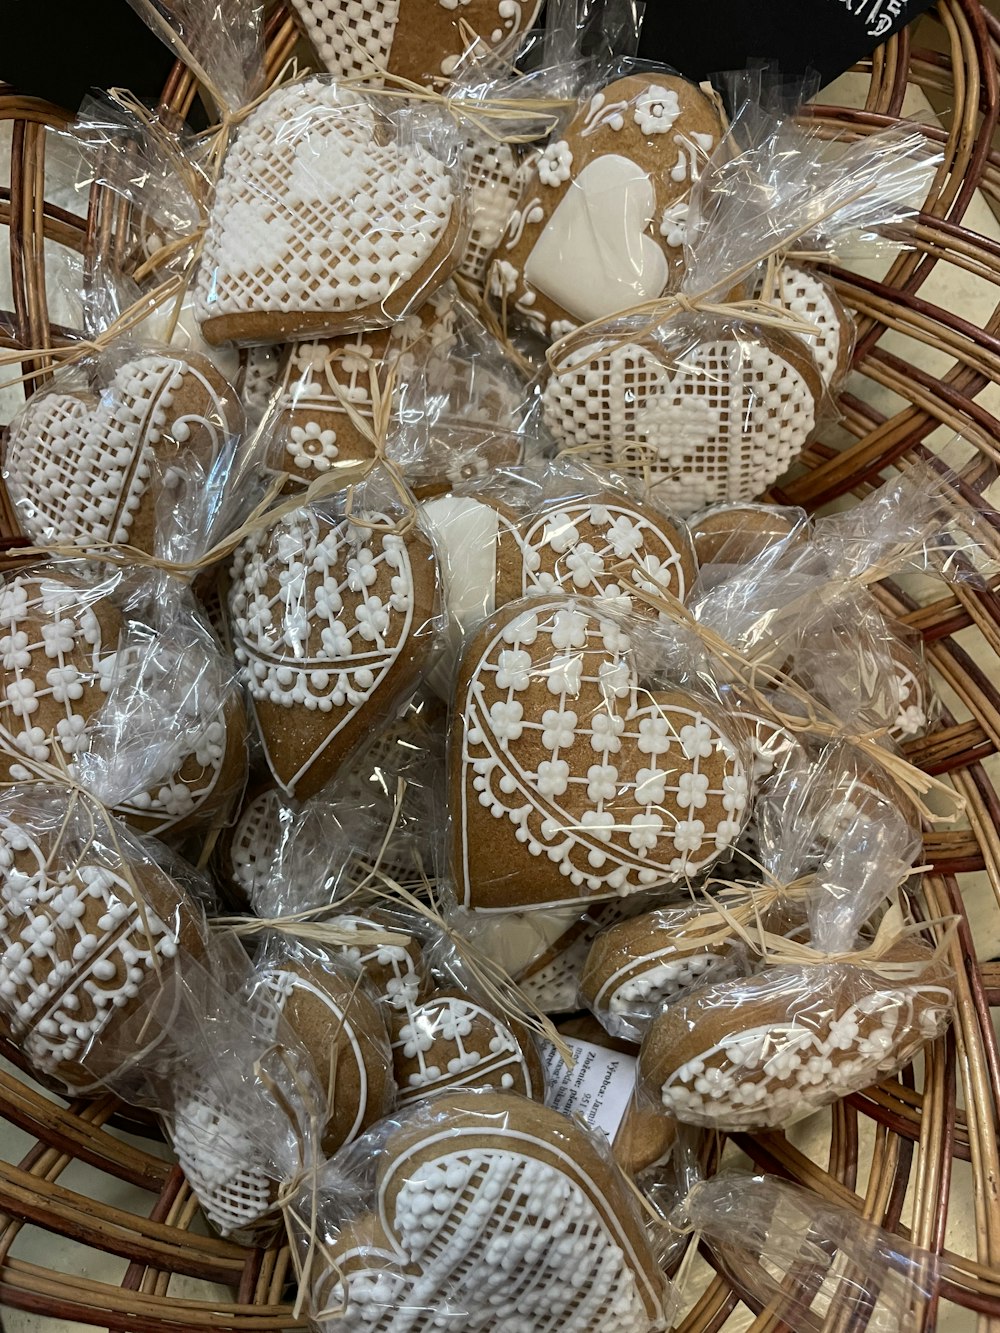 a basket filled with lots of heart shaped cookies